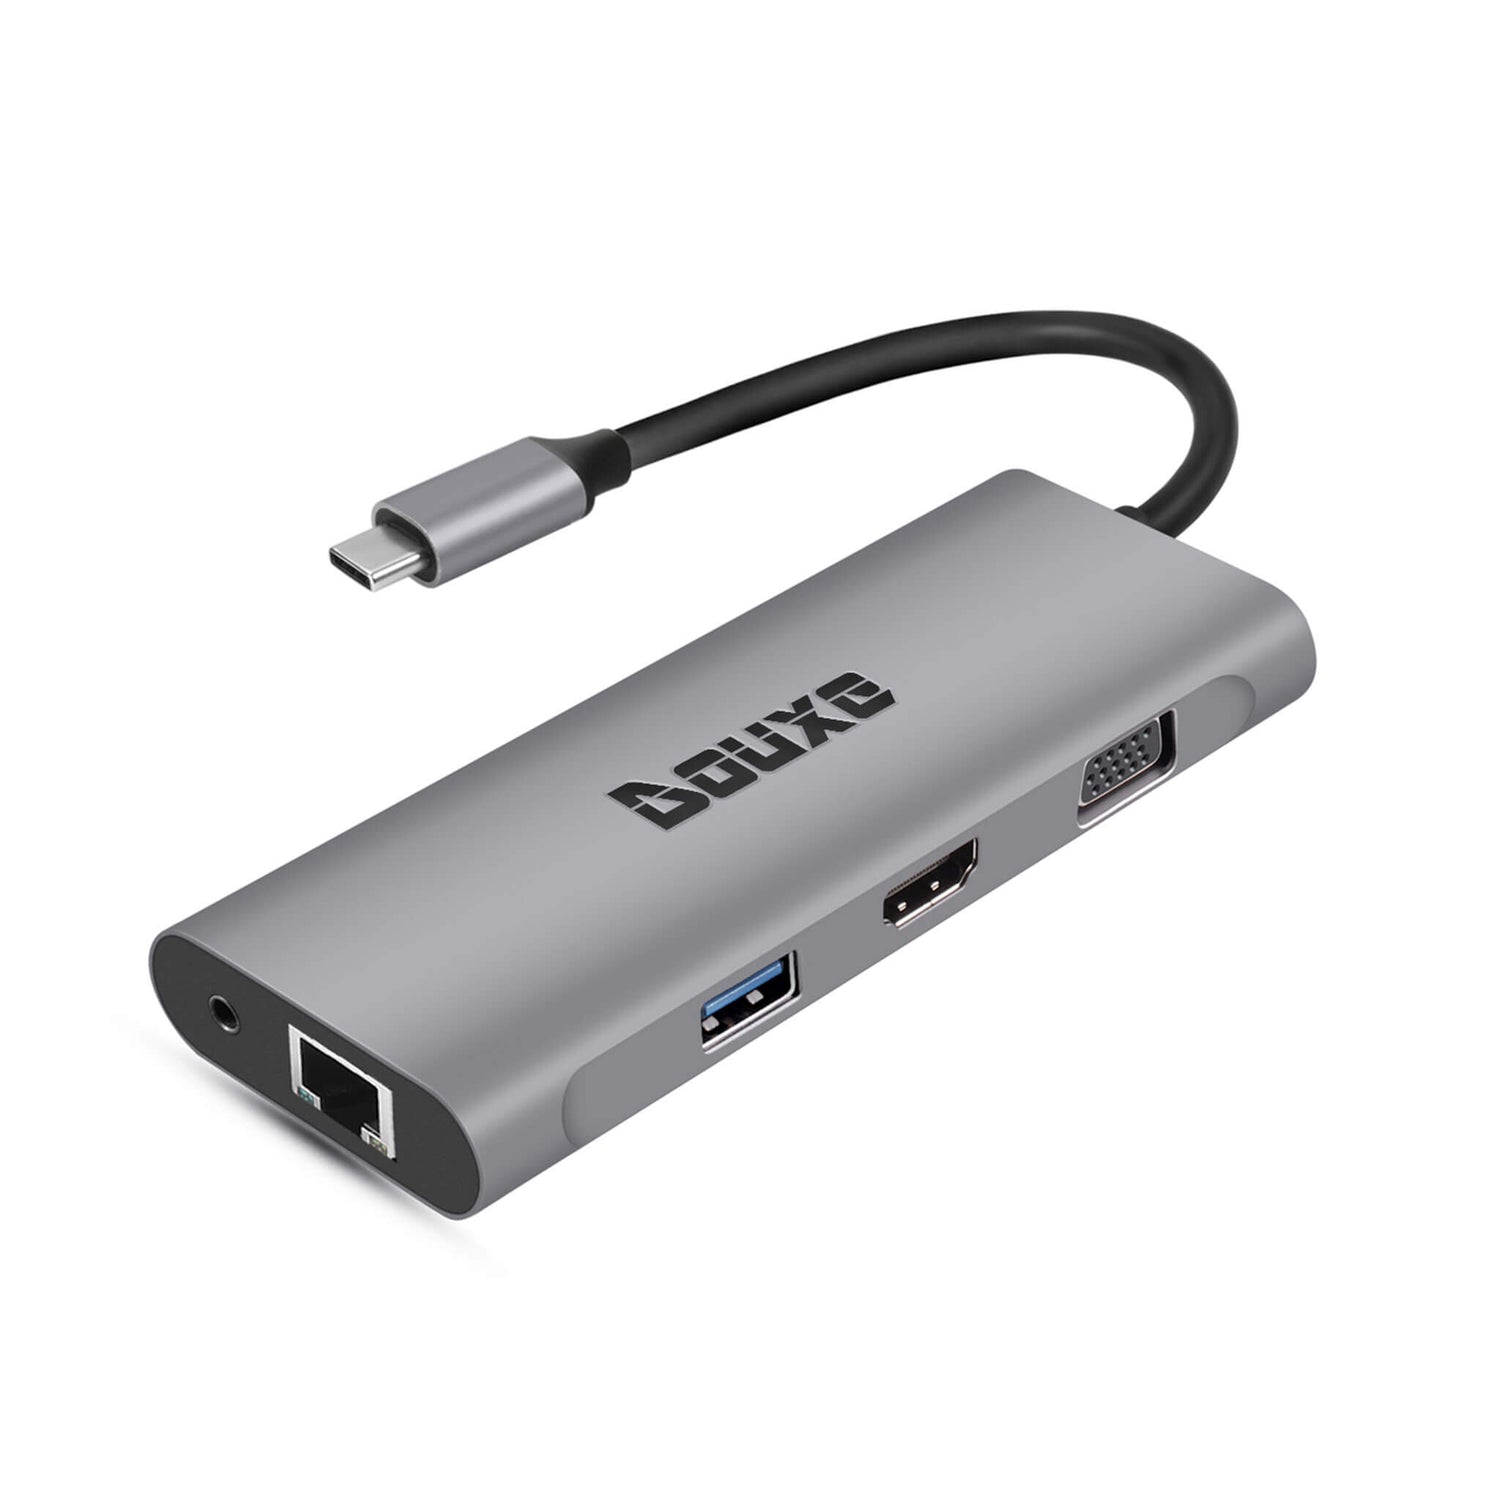 speler Terminal Stereotype H19 - USB-C to HDMI, VGA, USB-A 3.0, RJ-45, USB-C, 3.5mm Jack and SD & –  Douxe